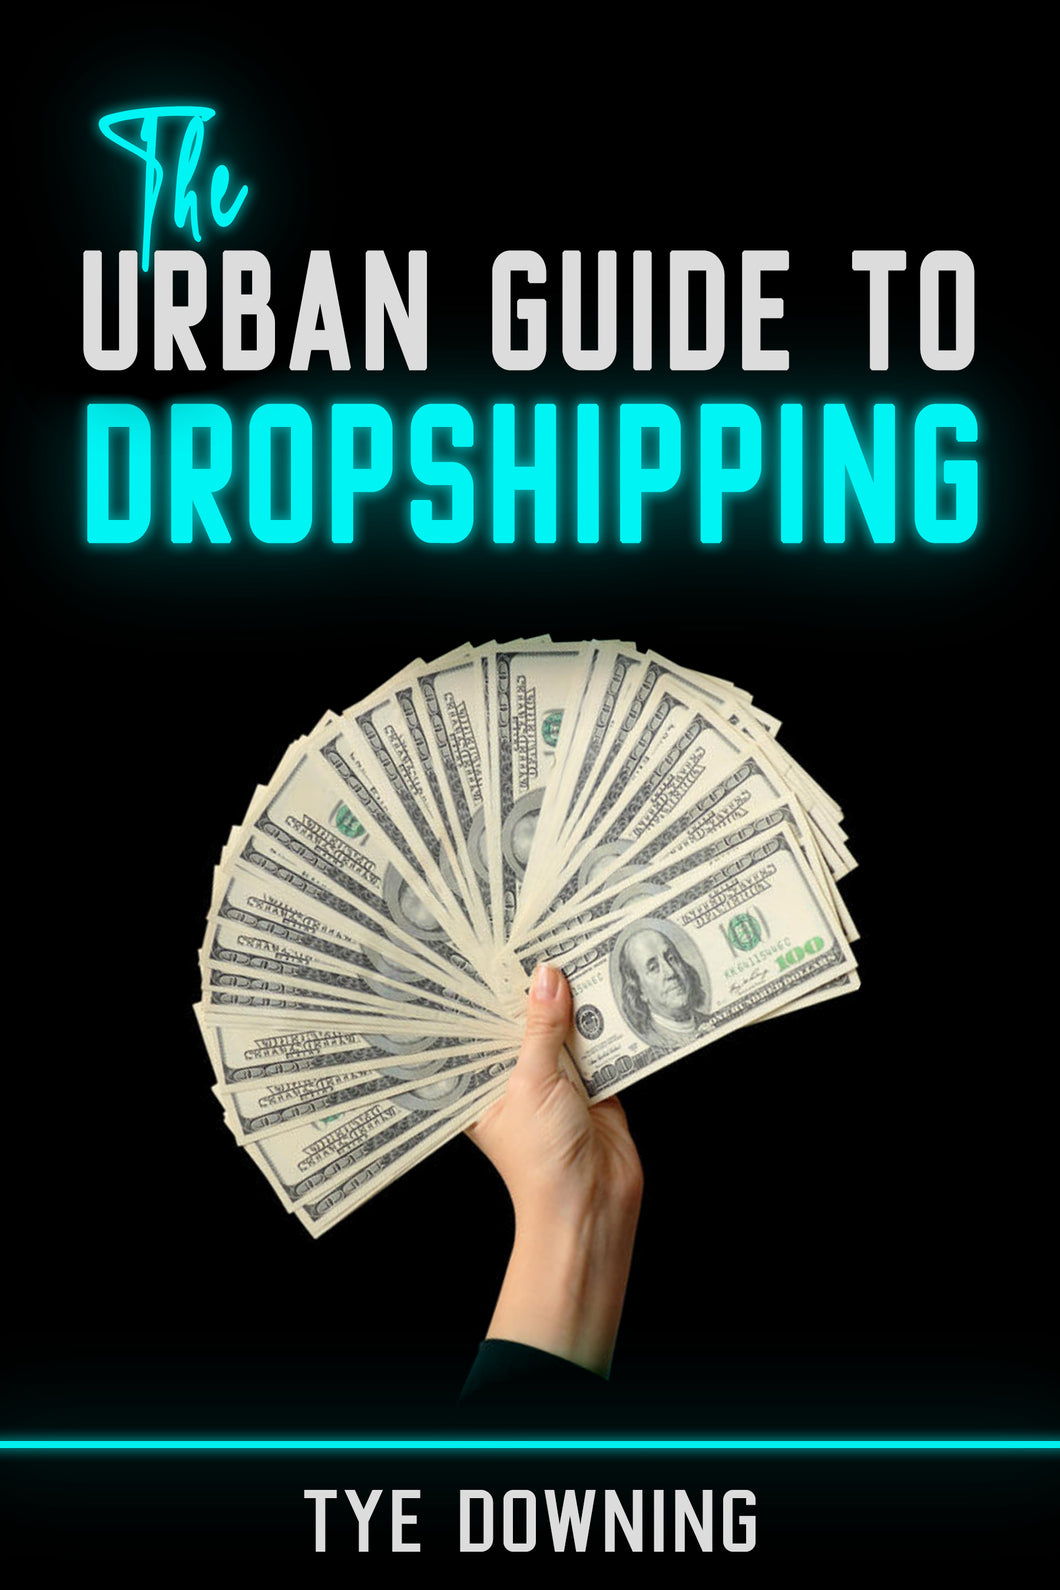 The Urban Guide to Dropshipping Ebook